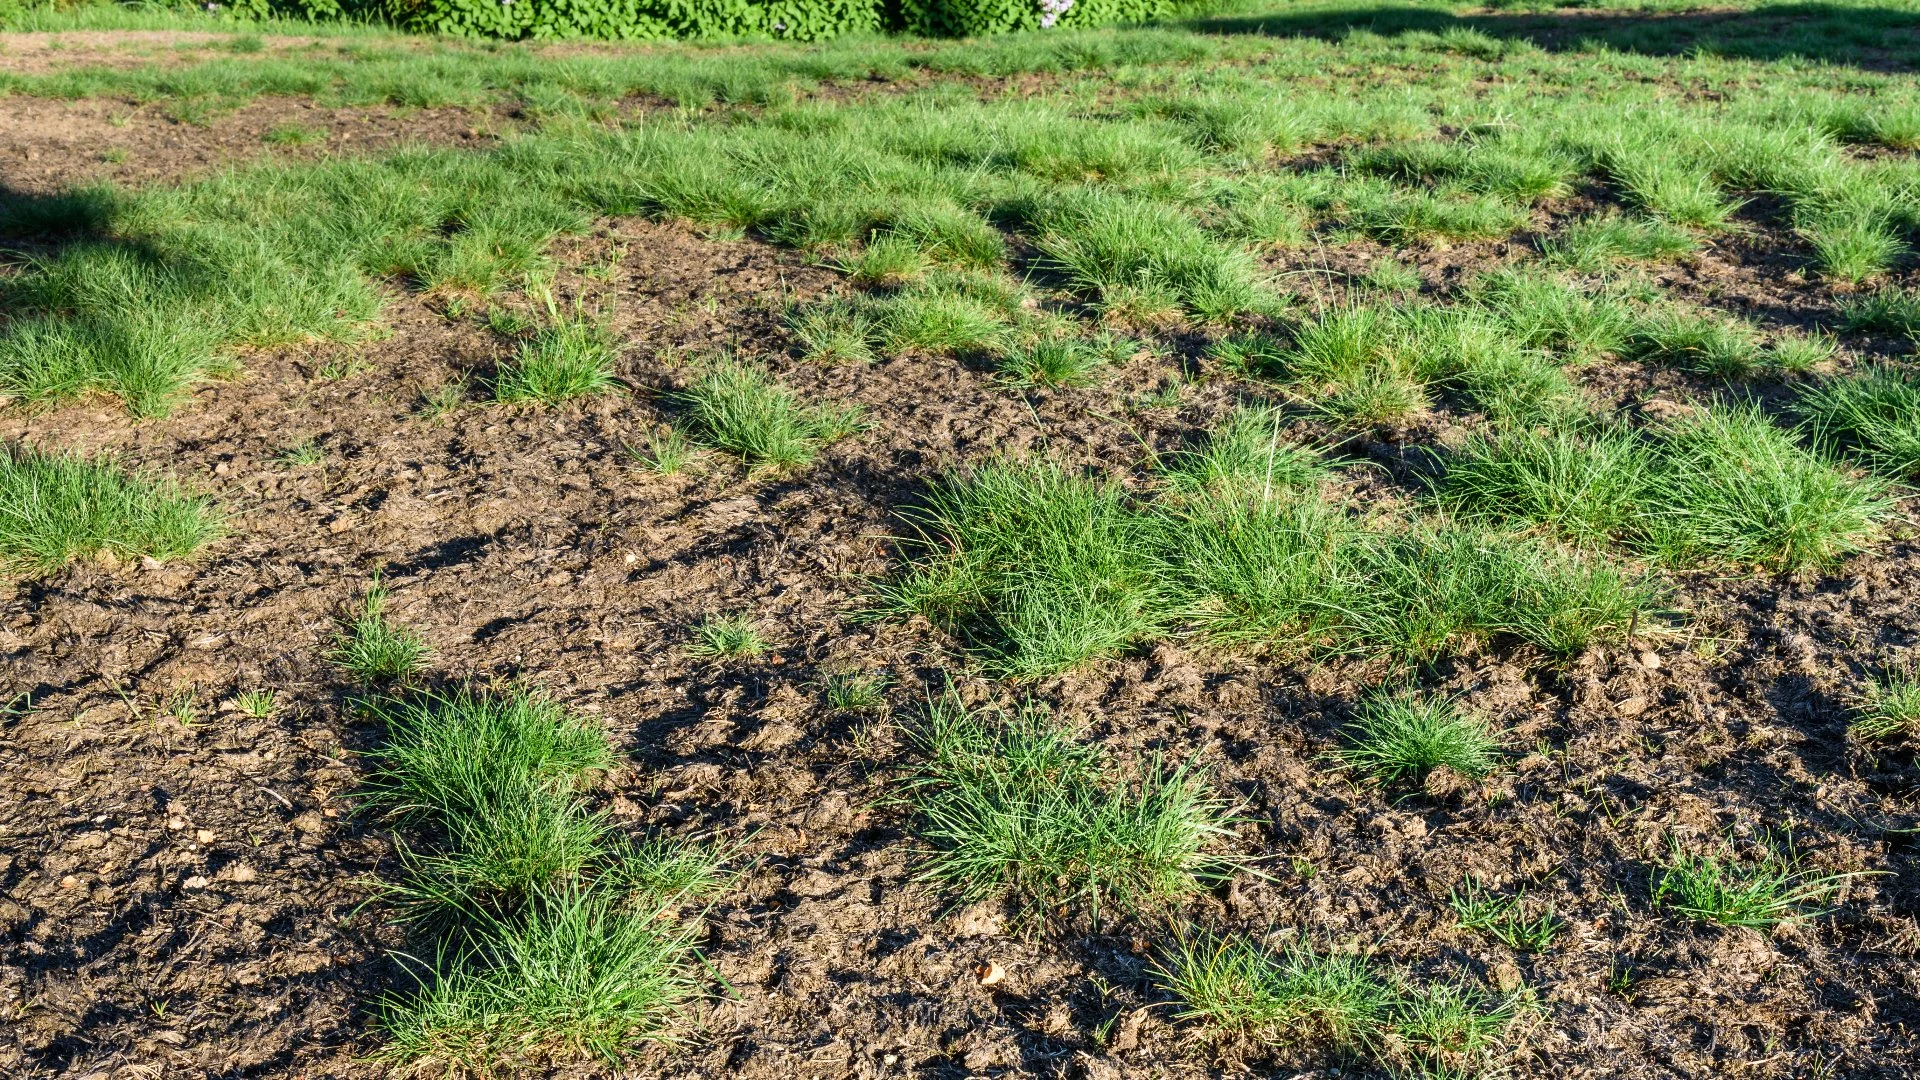 Why Is Your Lawn Brown? Comparing Dehydration, Over-Fertilization & Disease